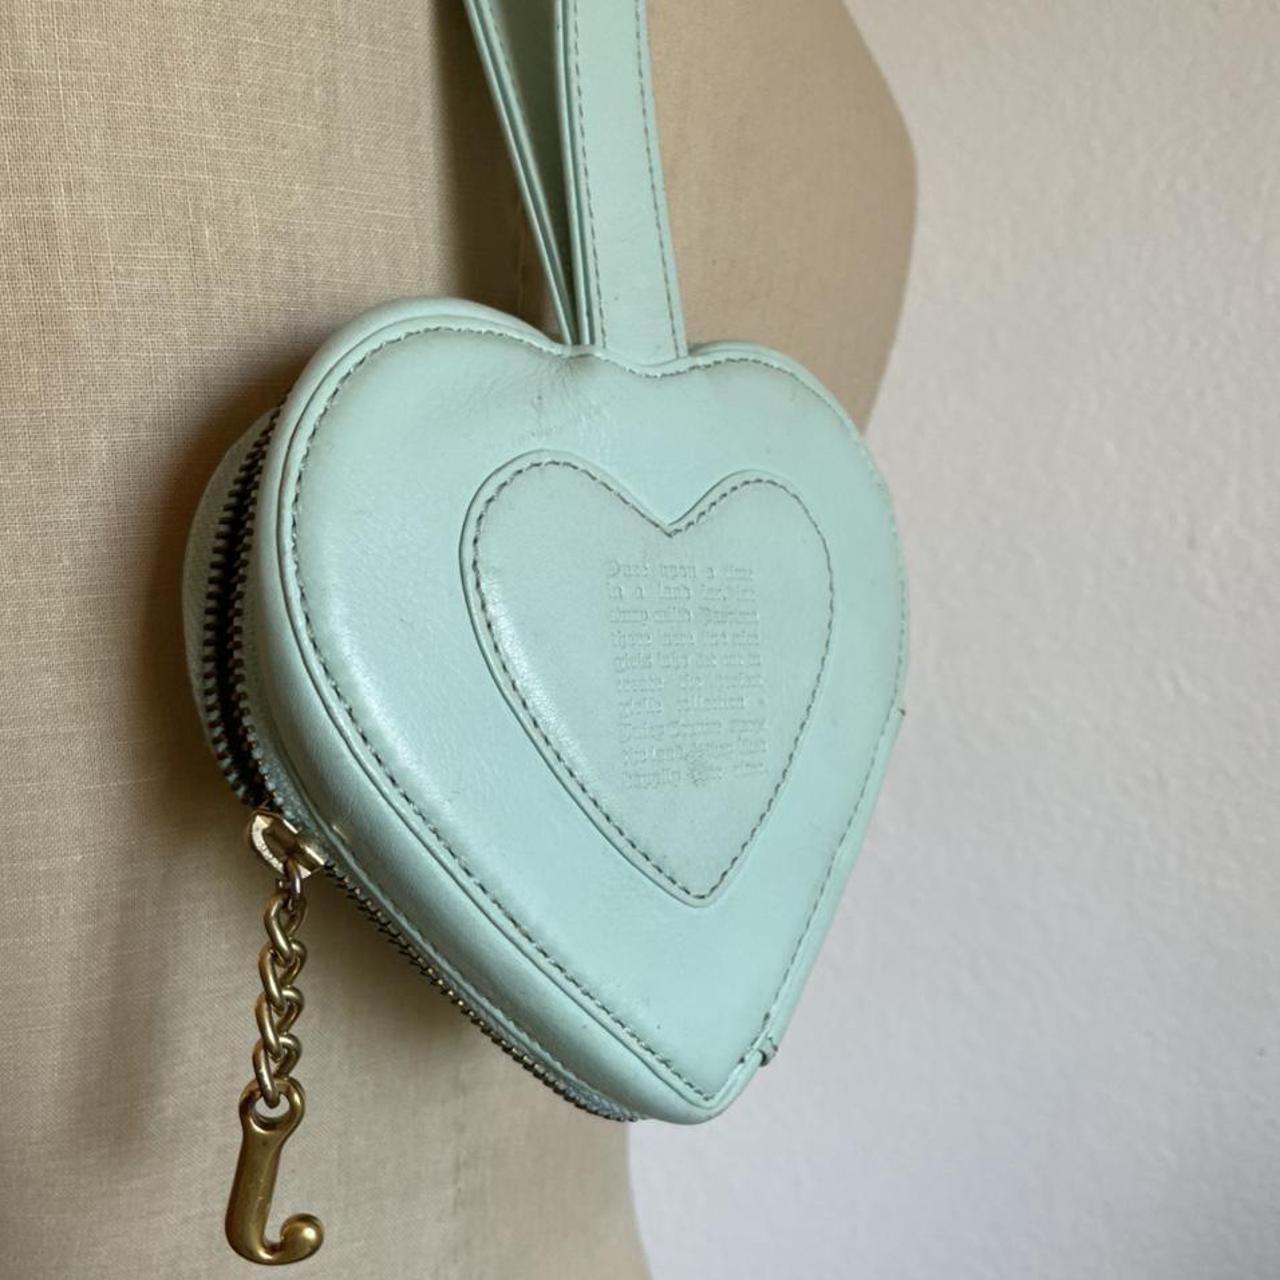 JUICY COUTURE HEART SHAPED WRISTLET💙 ANY QUESTIONS... - Depop